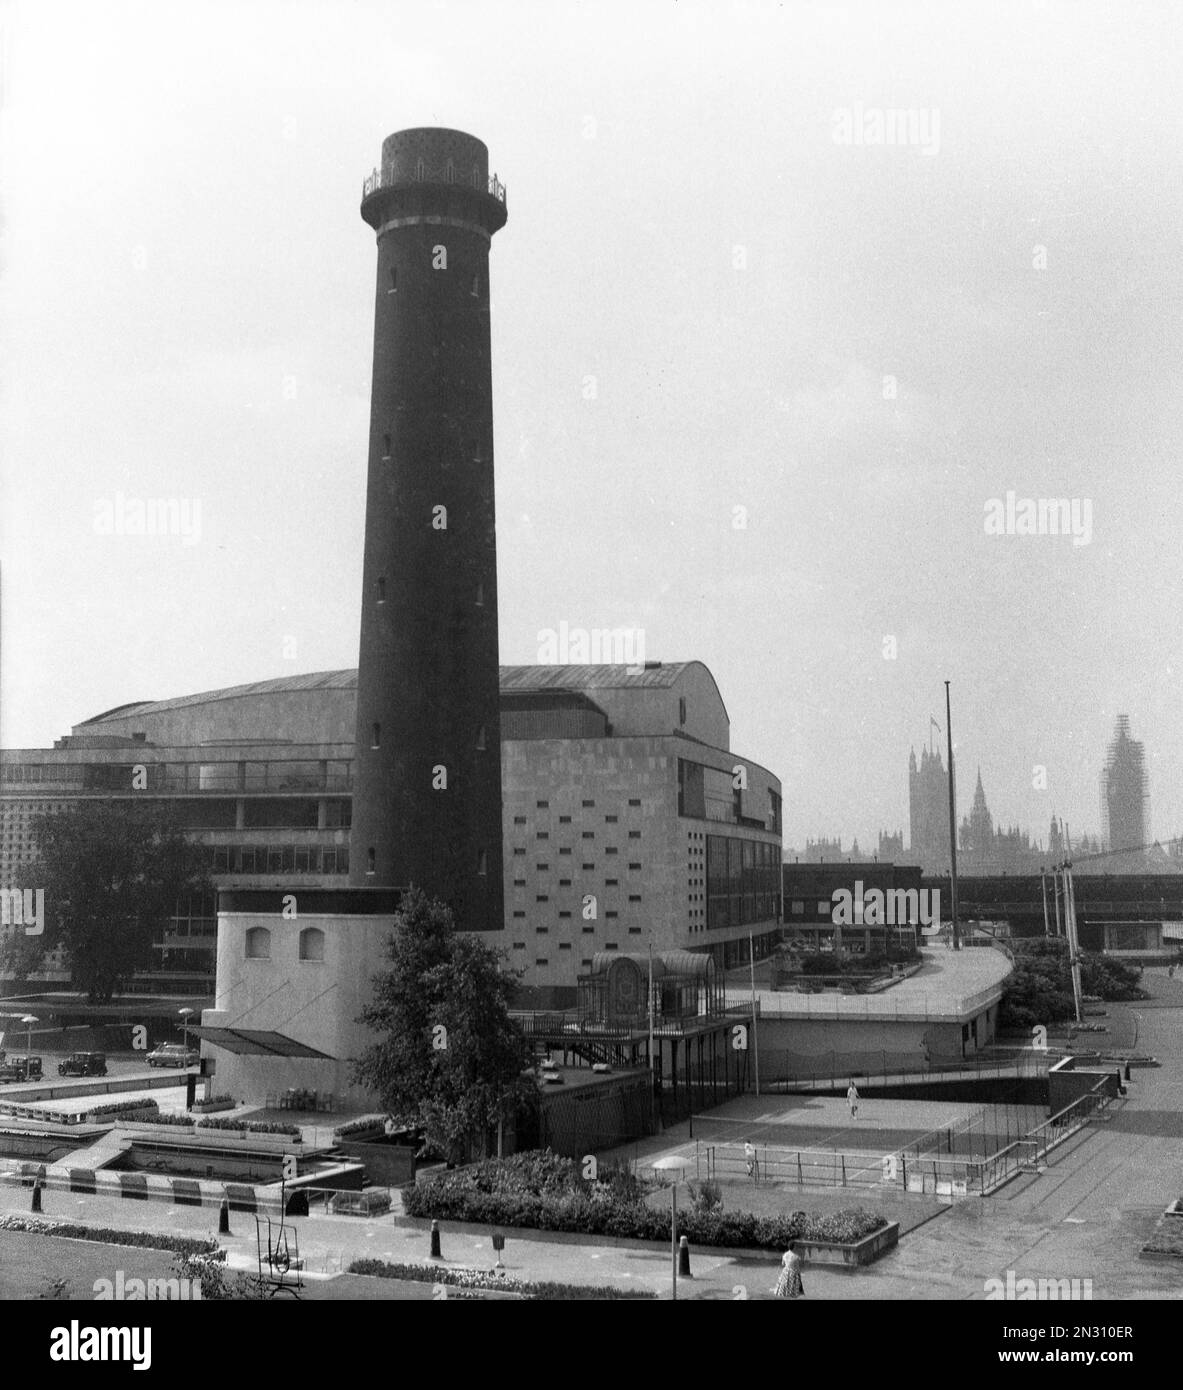 1950s, historicla, exterior view of the Shot Tower and the Royal Festival Hall, on the South Bank, Lambeth, London, England, UK. The Shot Tower at the Lambeth Lead Works, was built in 1826 and was the only existing building retained on the site for the Festival of Britain held in 1951. Designed by Sir Robert Matthew and J L Martin, the hall was built in 1949-51 as a concert hall for the Festival. Waterloo Bridge is in the distance. In 1962 the tower was demolished and the Queen Elizabeth Hall opened in 1967. Stock Photo